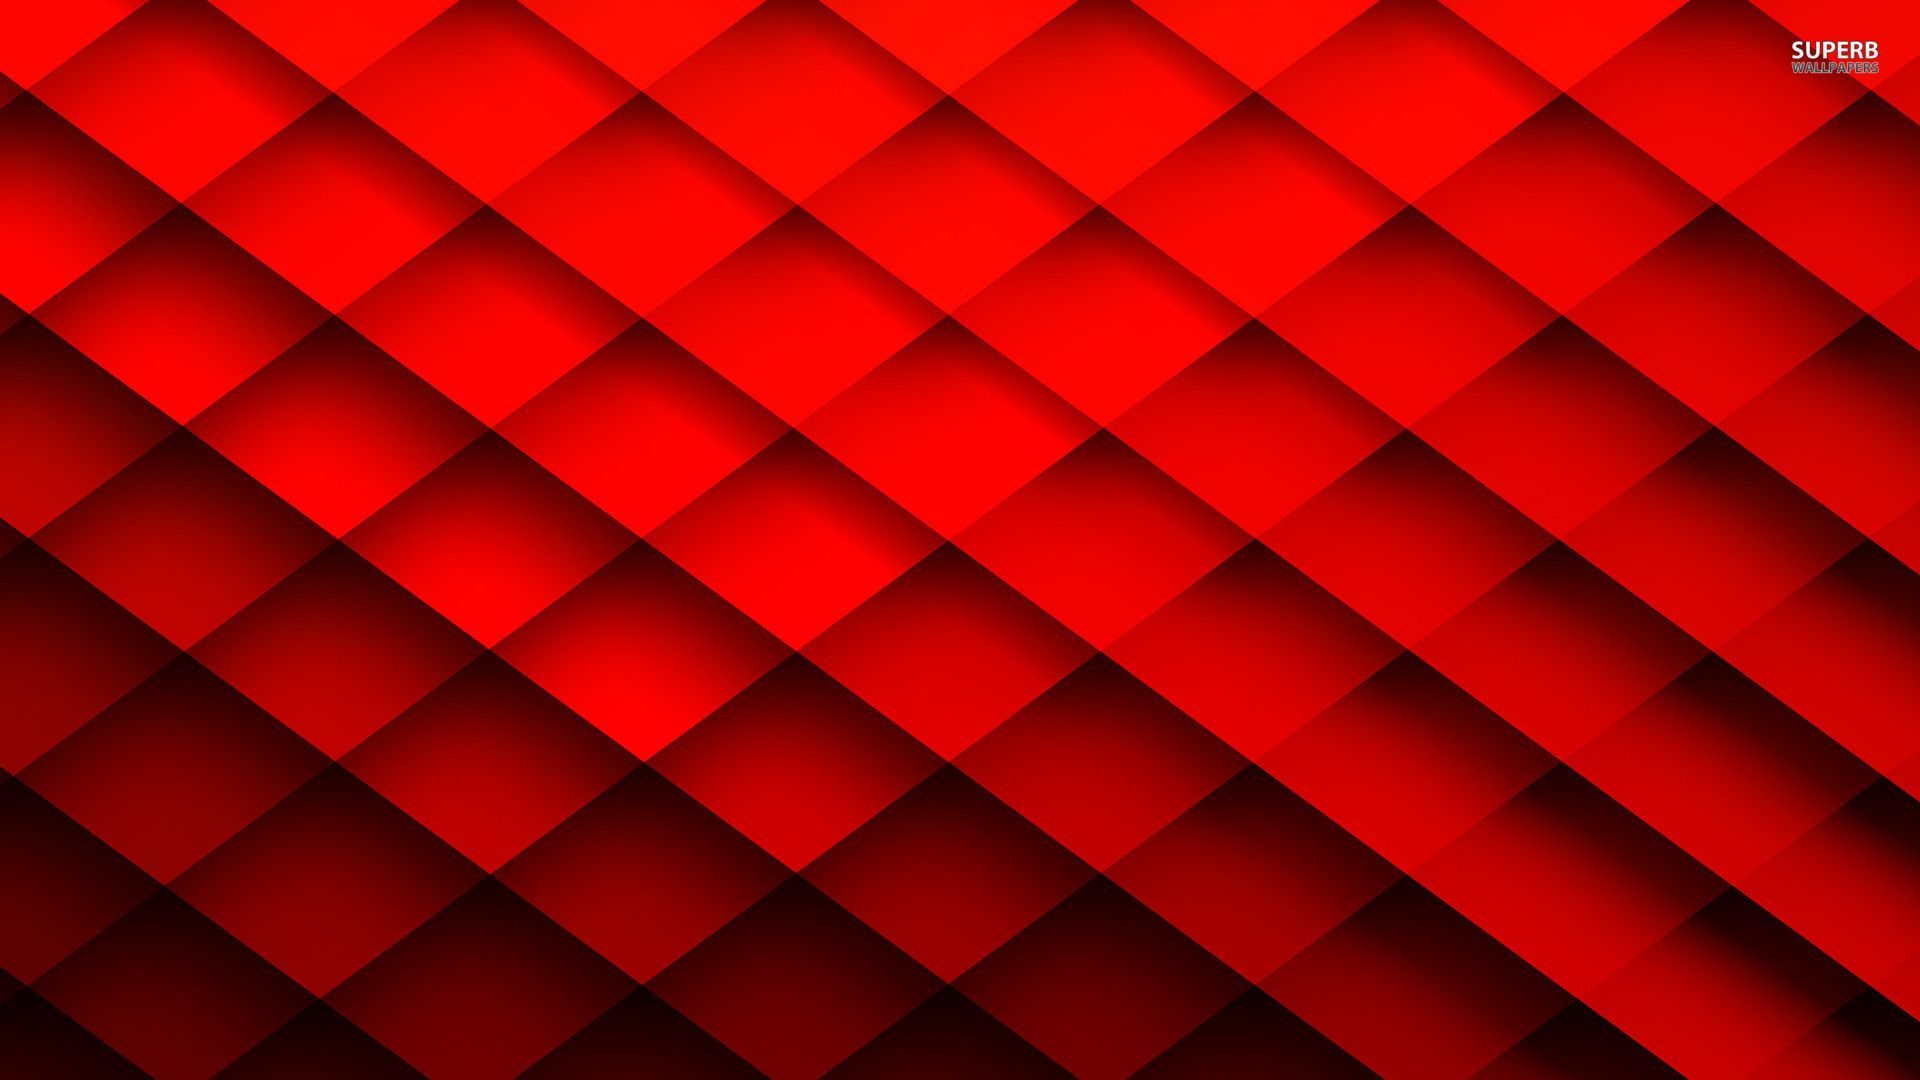 Pattern Full HD Wallpapers Group (87+)